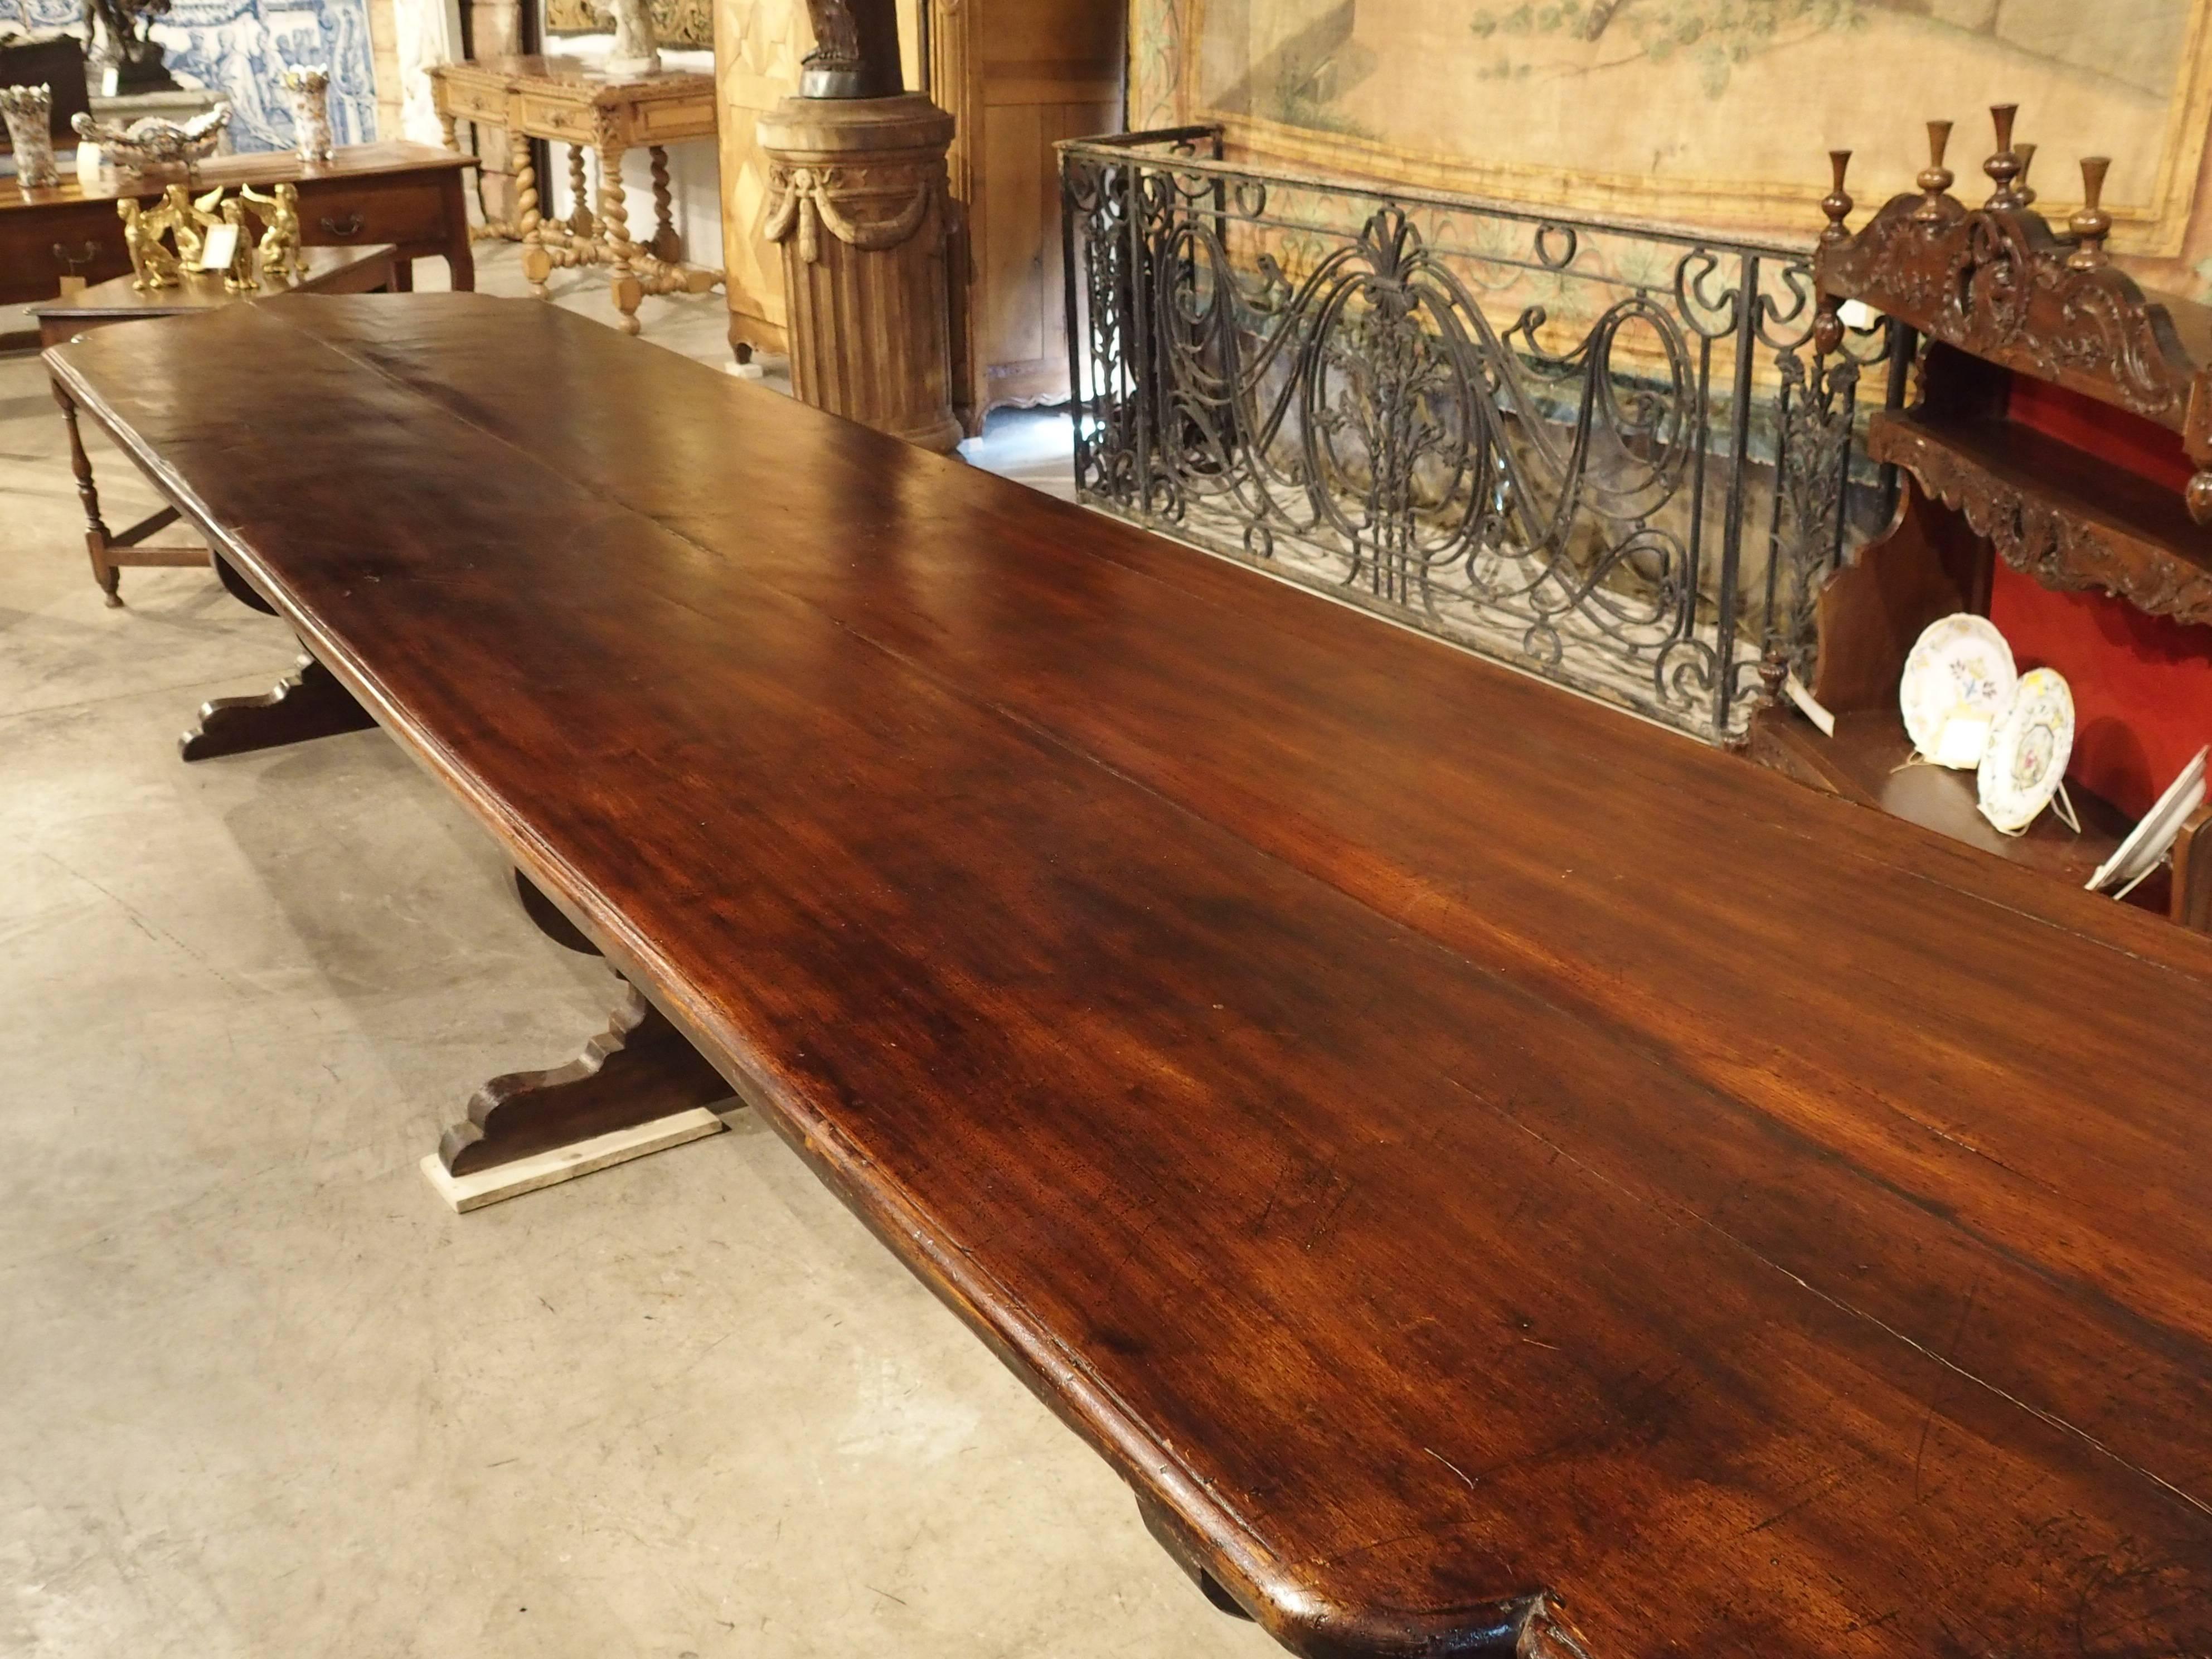 This extremely long, Italian table with thick, curved, iron stretchers is absolutely magnificent! It is a little over fifteen feet long and has been made from Italian walnut wood. At either end of the tabletop, there is a central arch with shaped